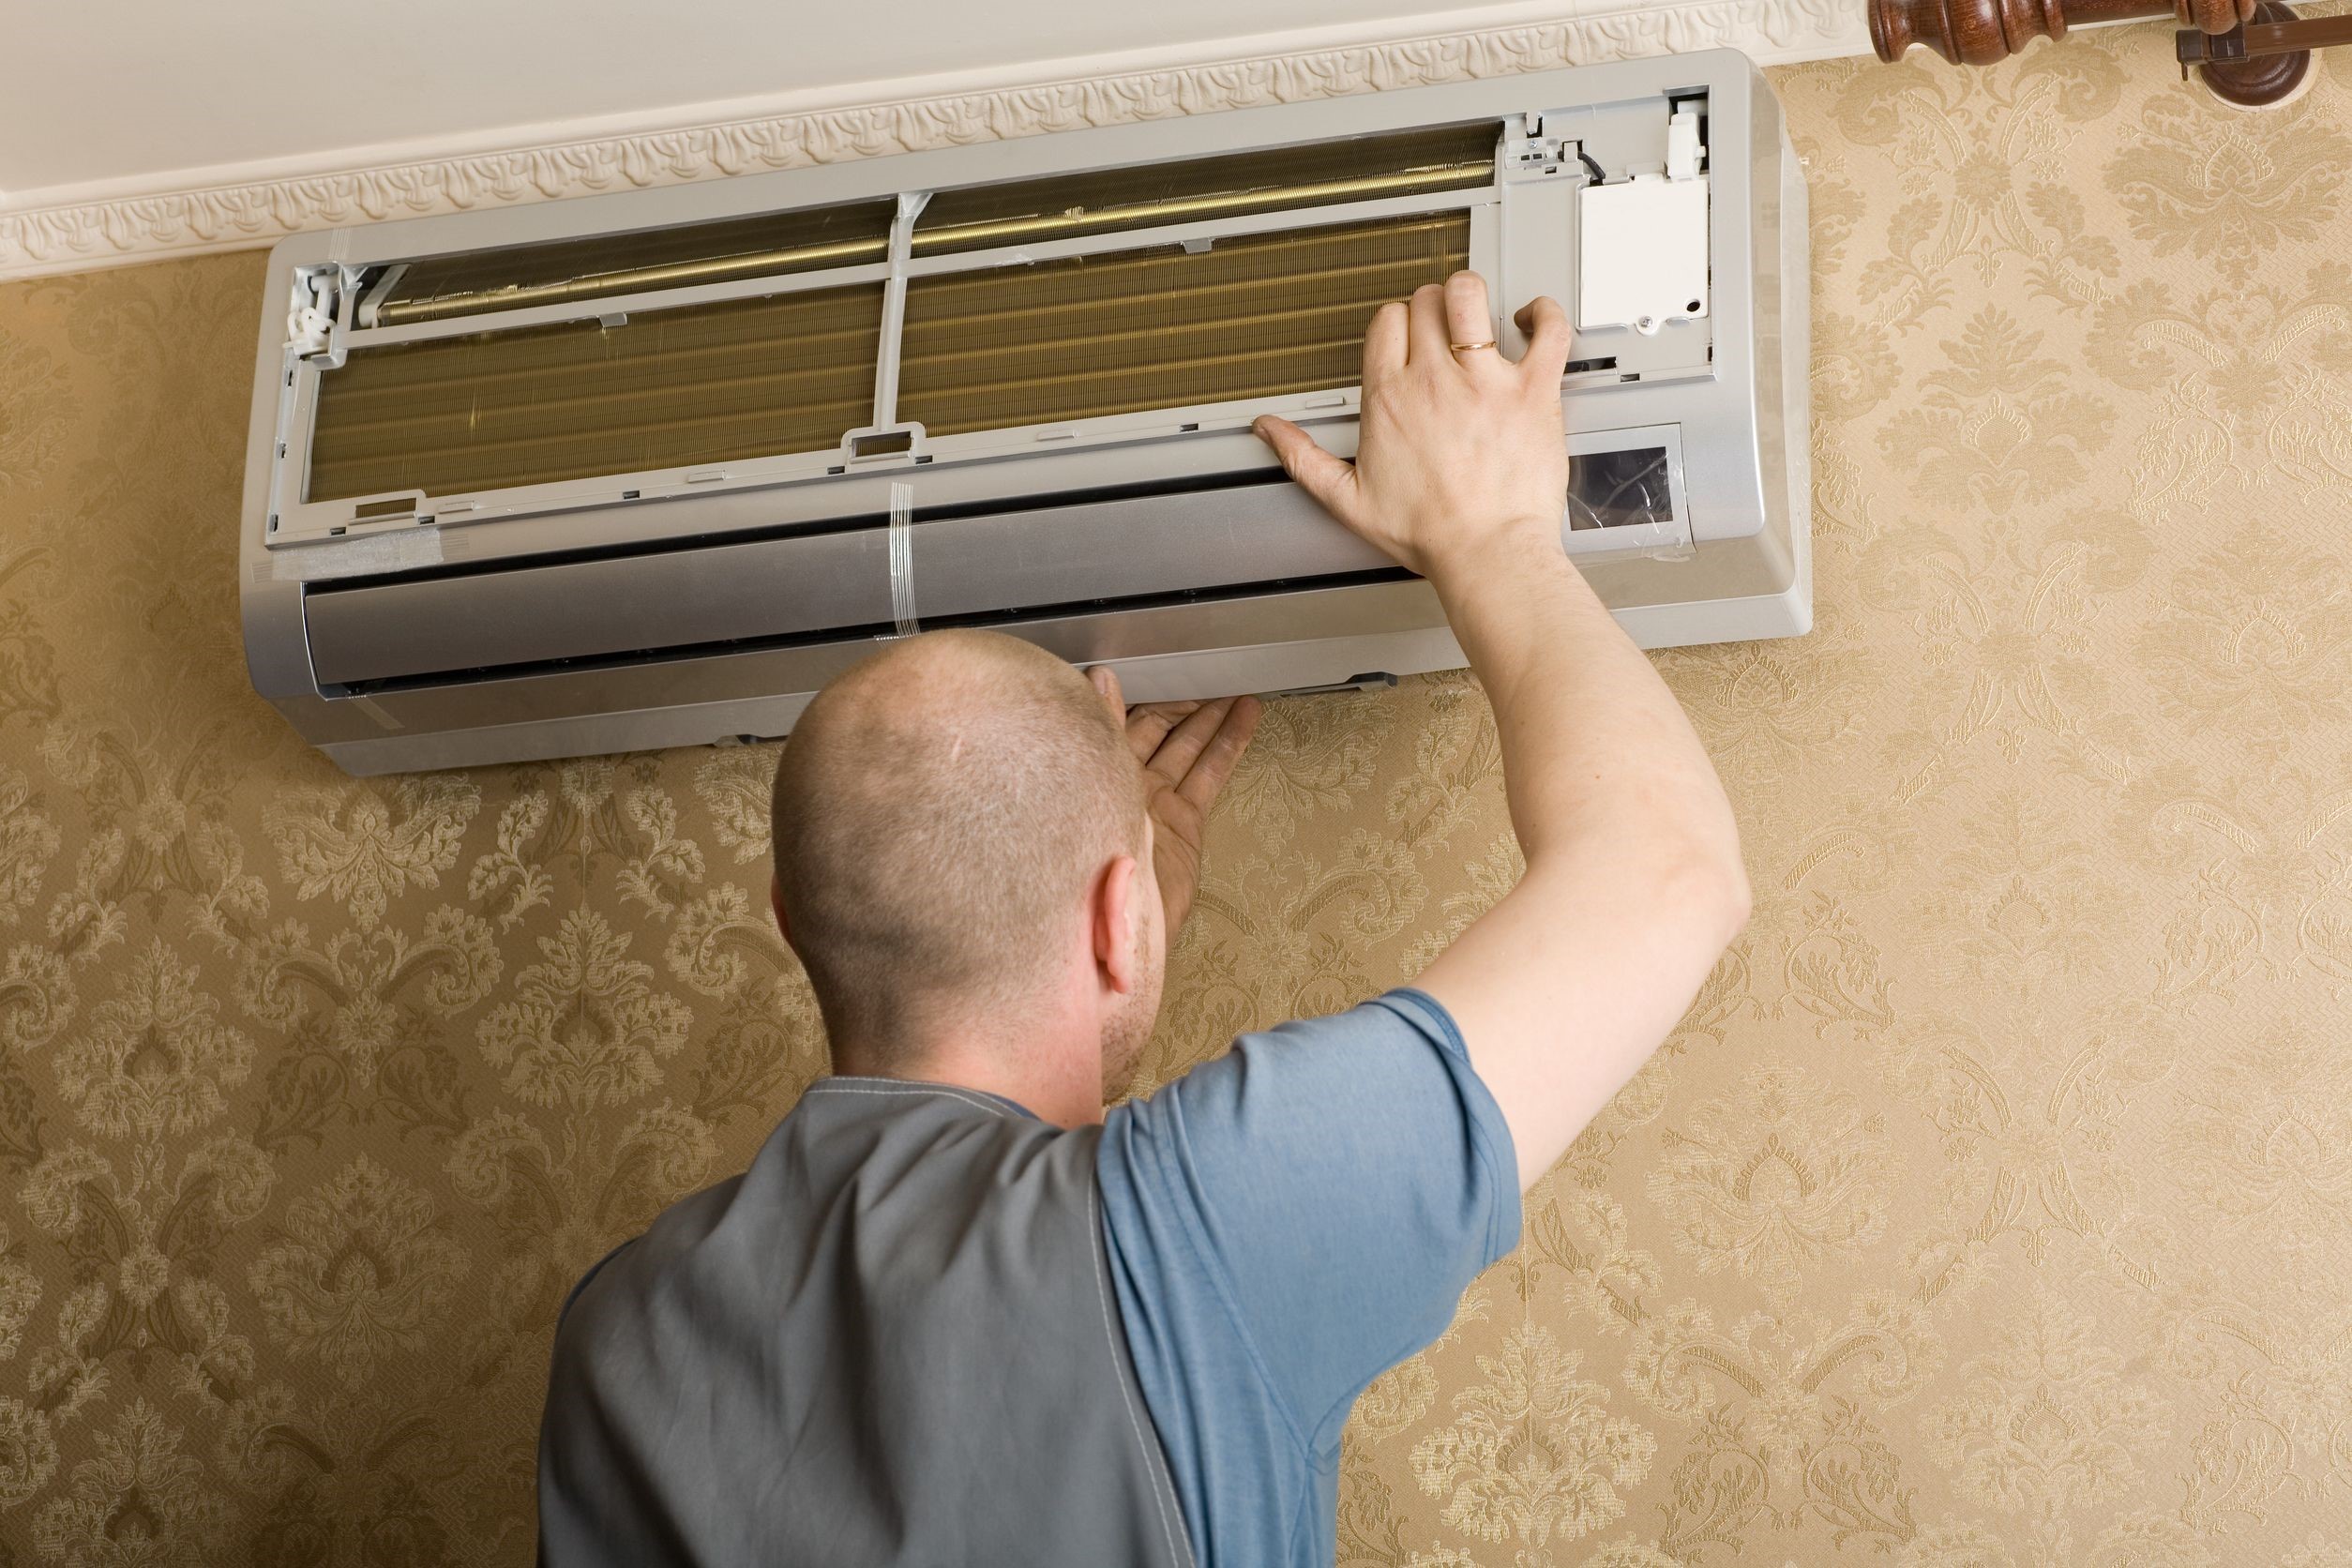 York Heating And Air Conditioning Parts